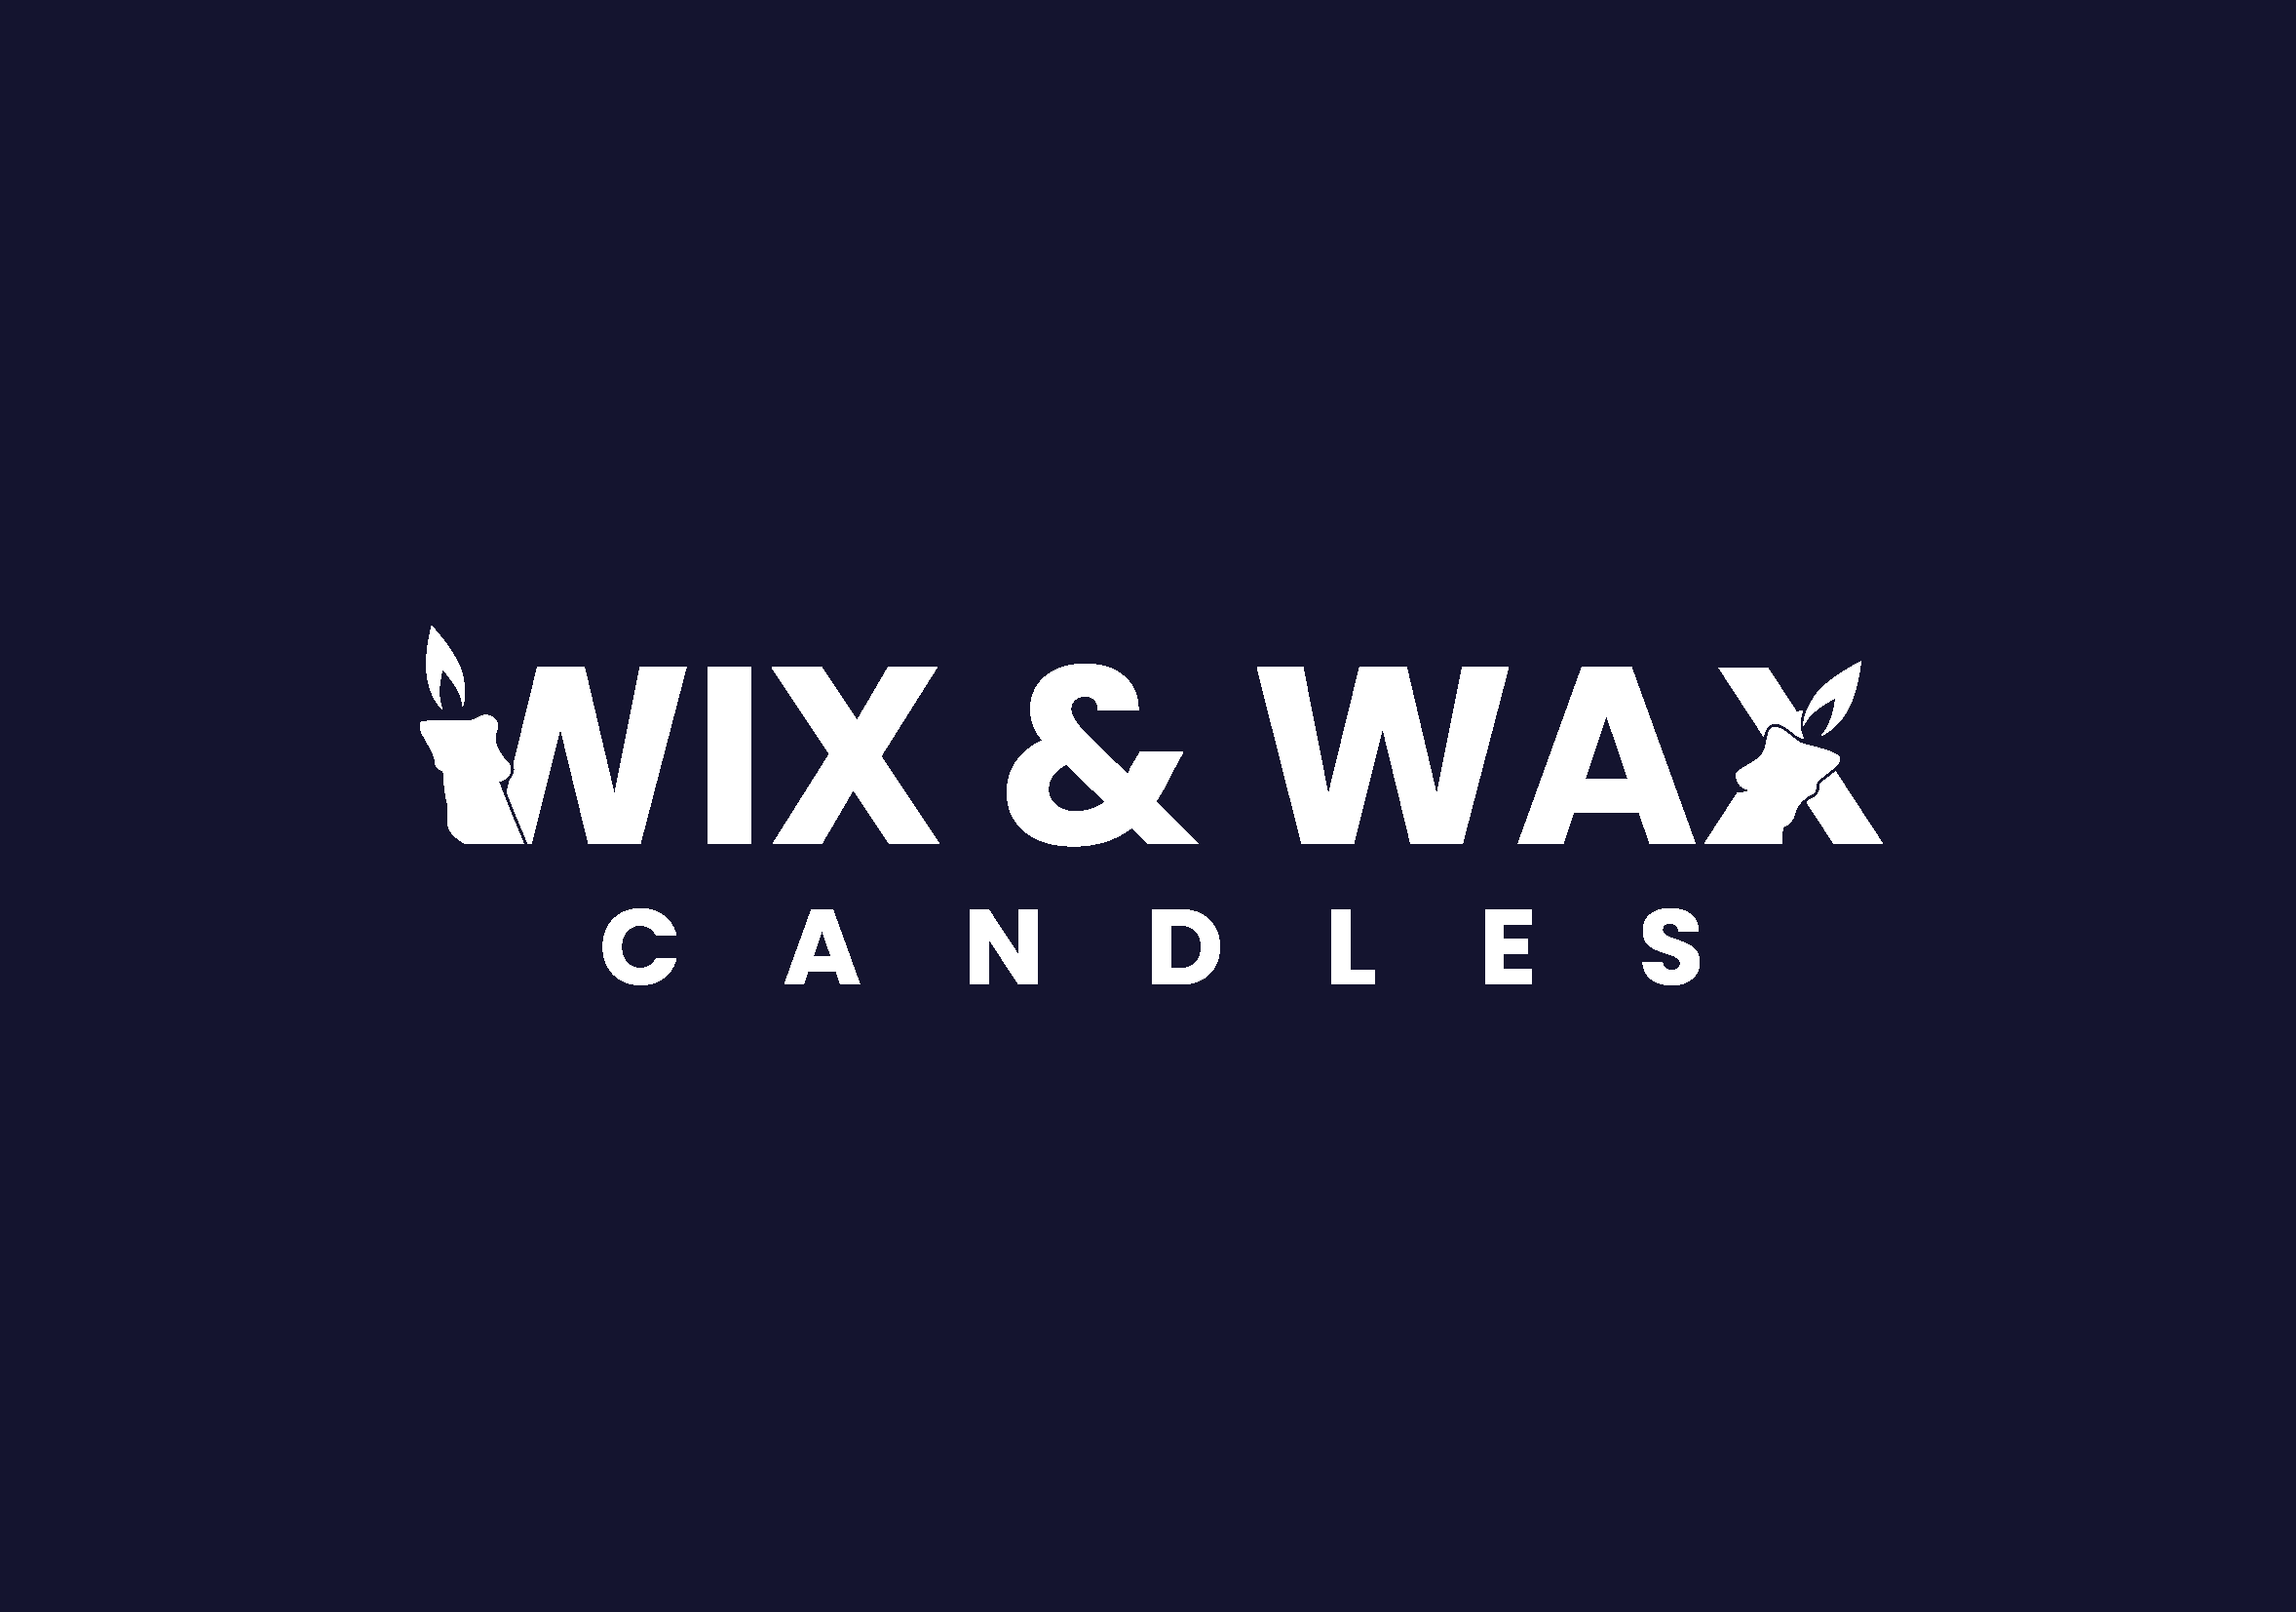 Wix & Wax Candles